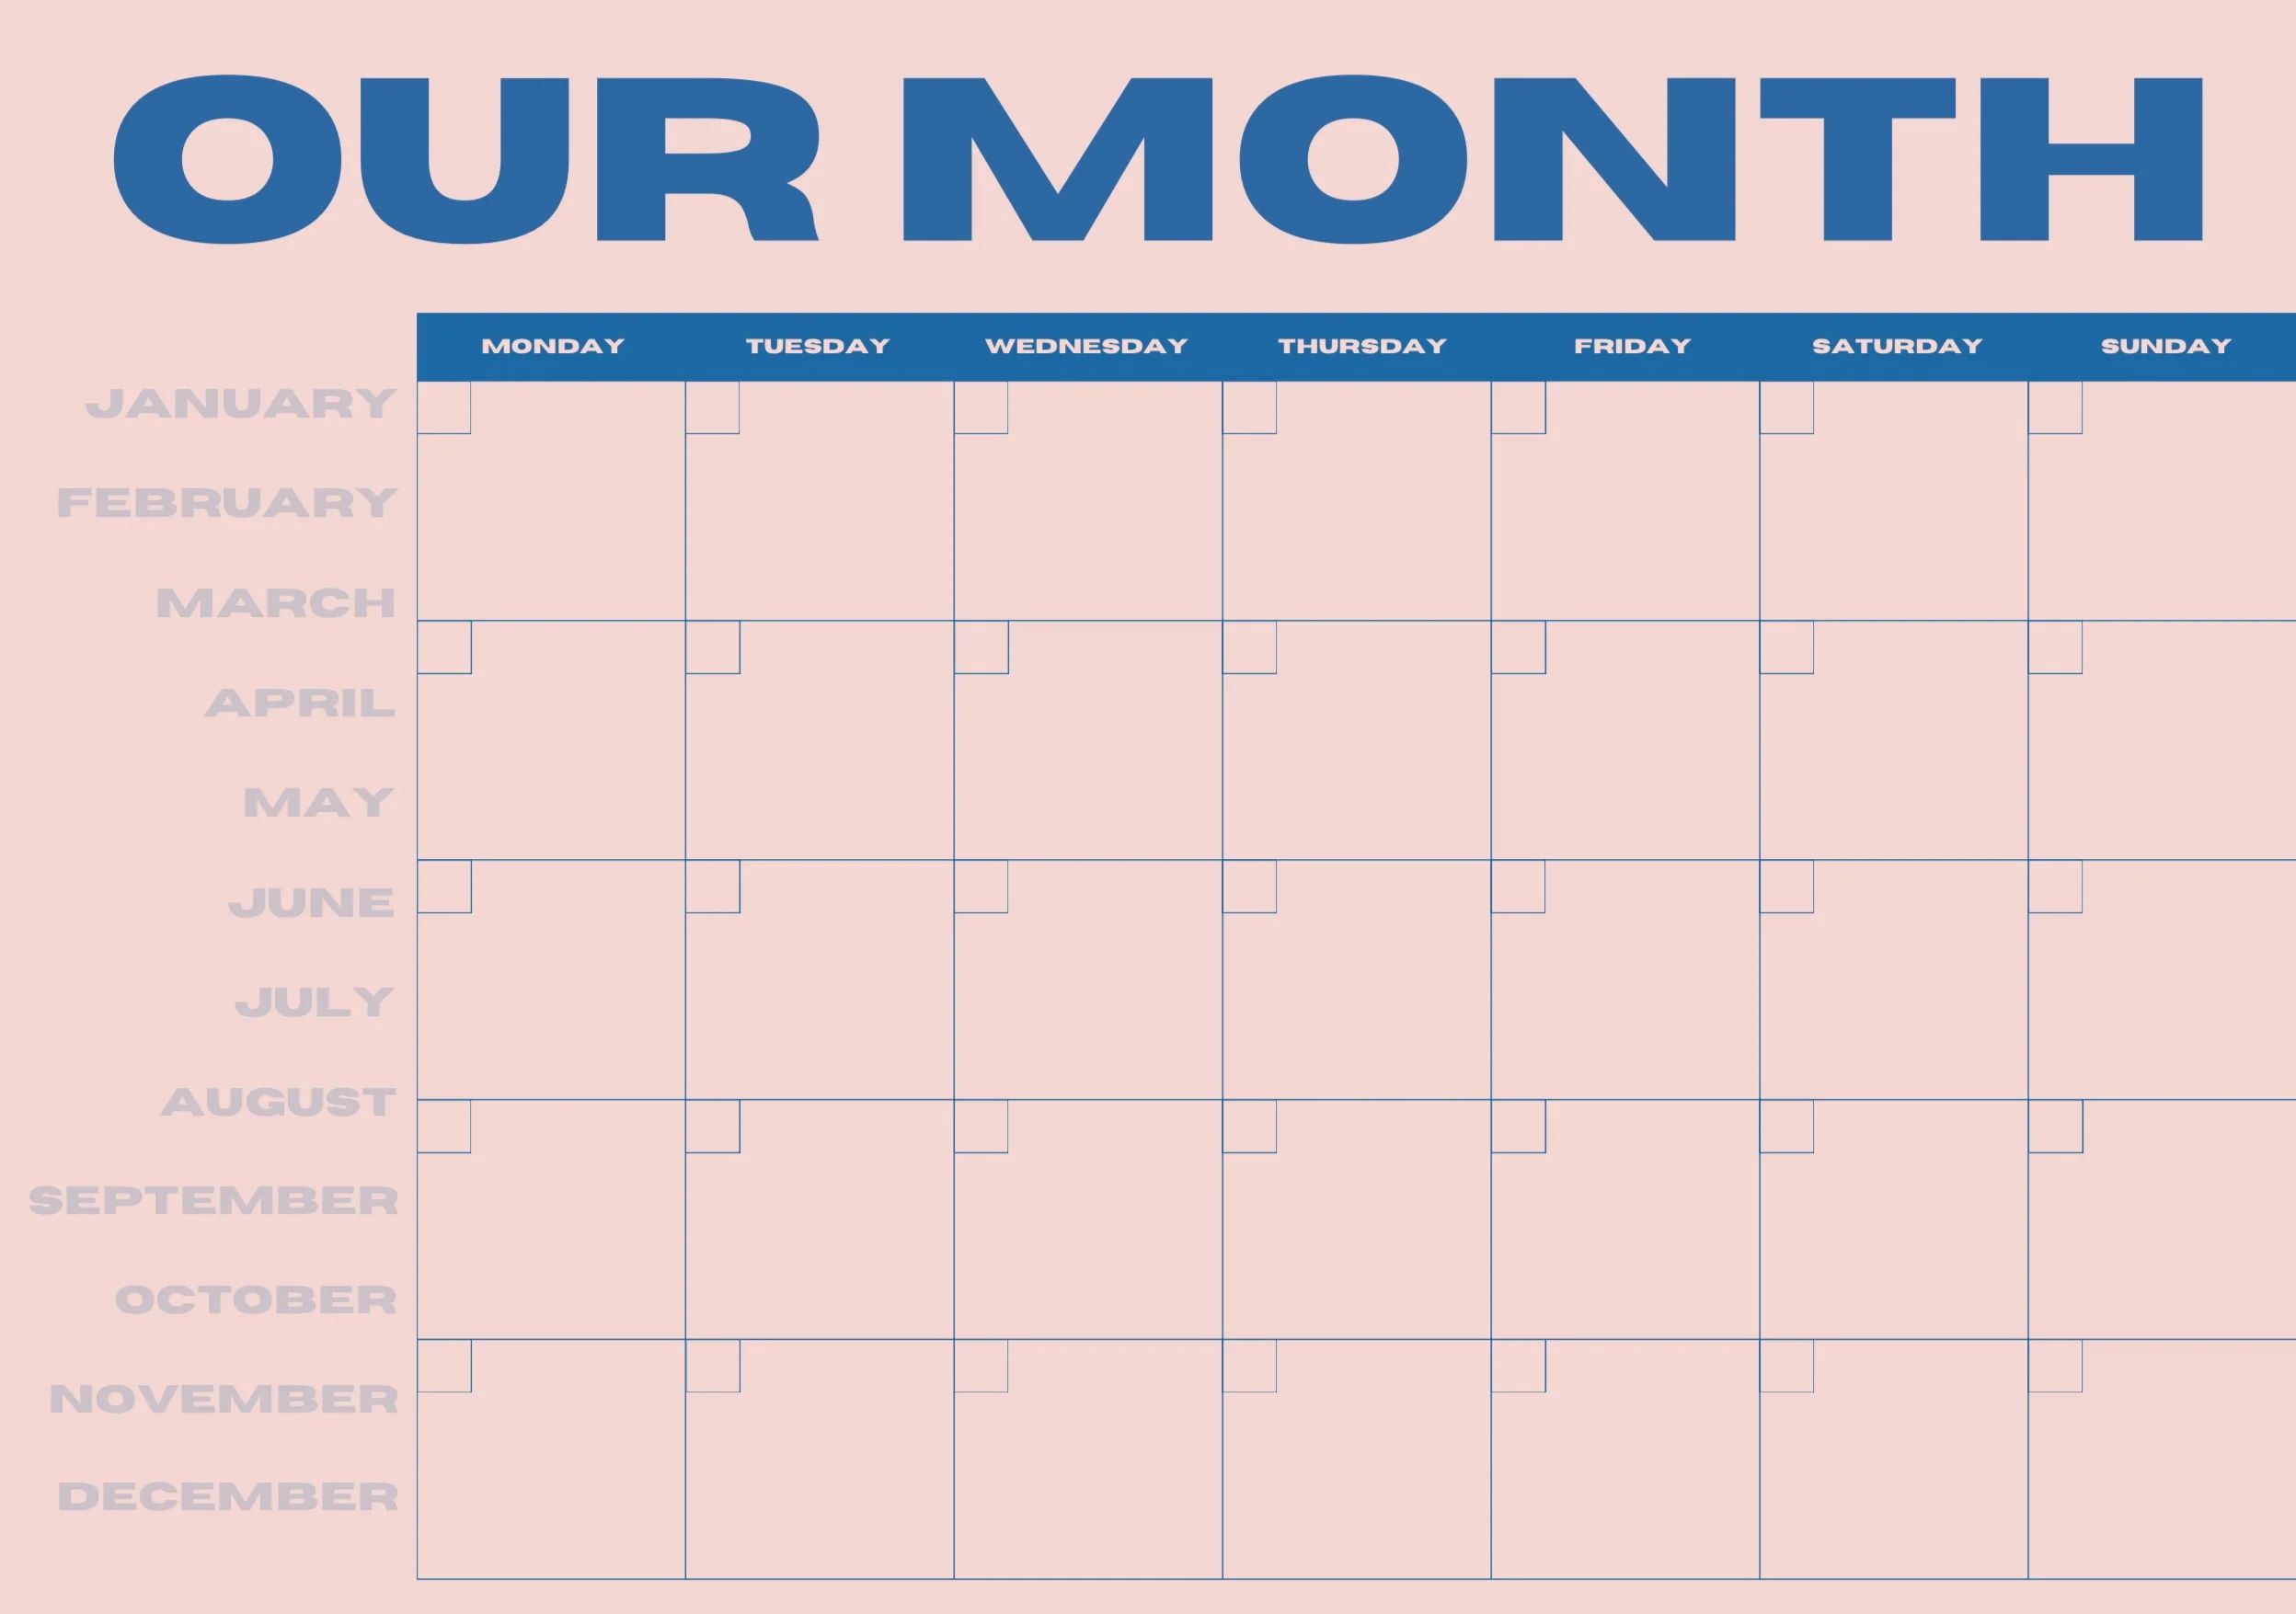 Our Month Planner - Pink and Blue | Sonderhuas